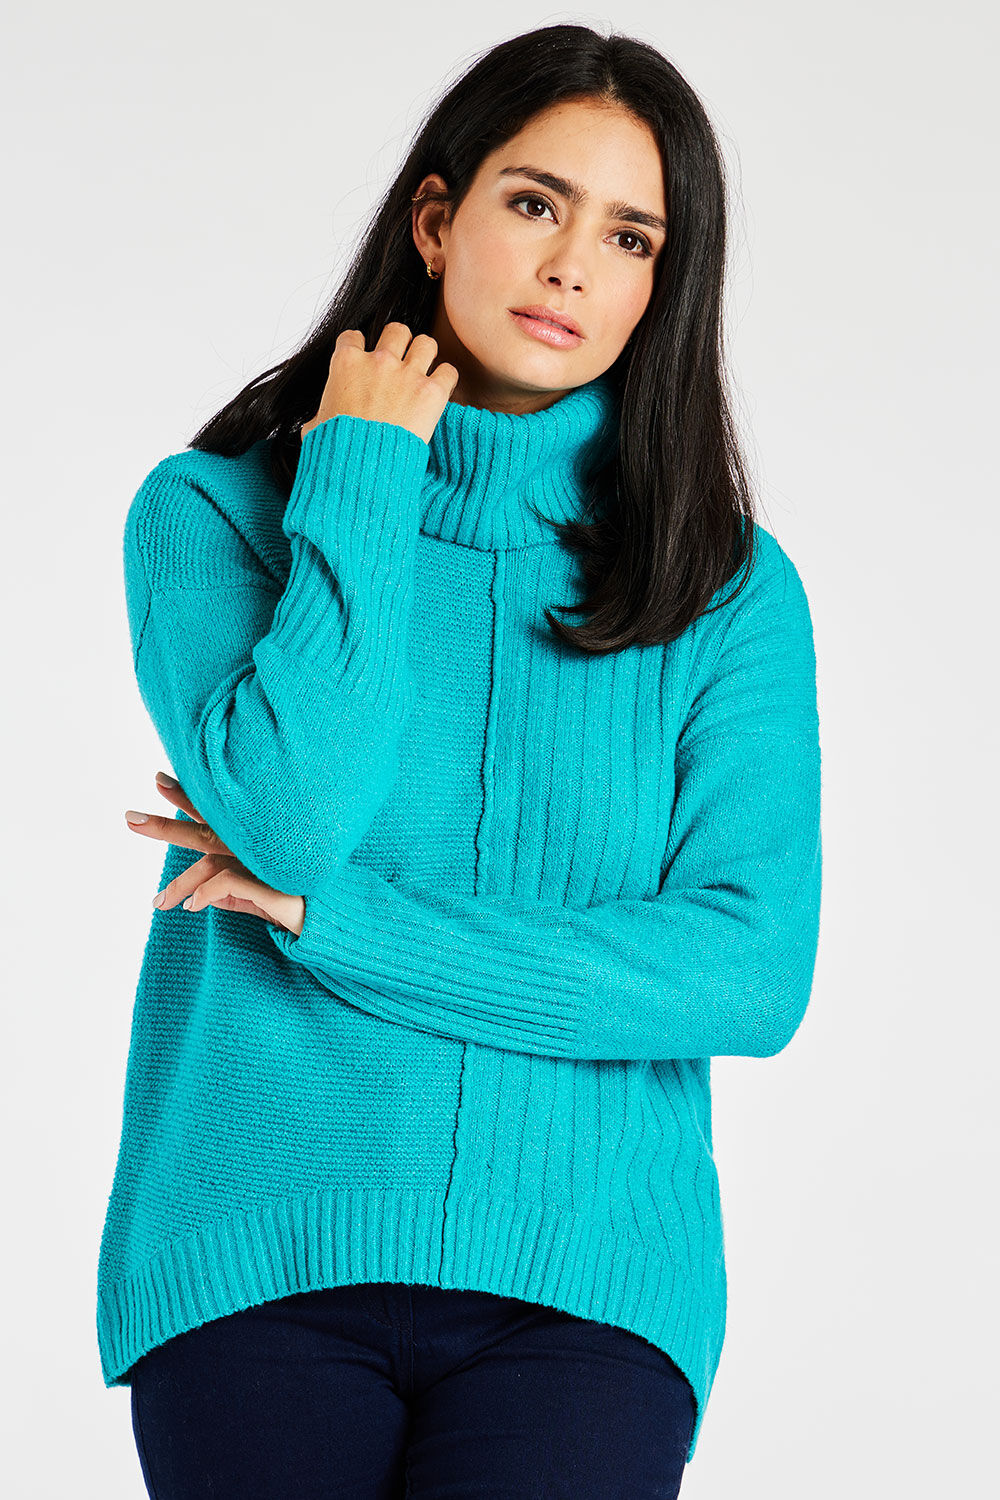 Bonmarche Jade Roll Neck Jumper With Rib Detail, Size: 10